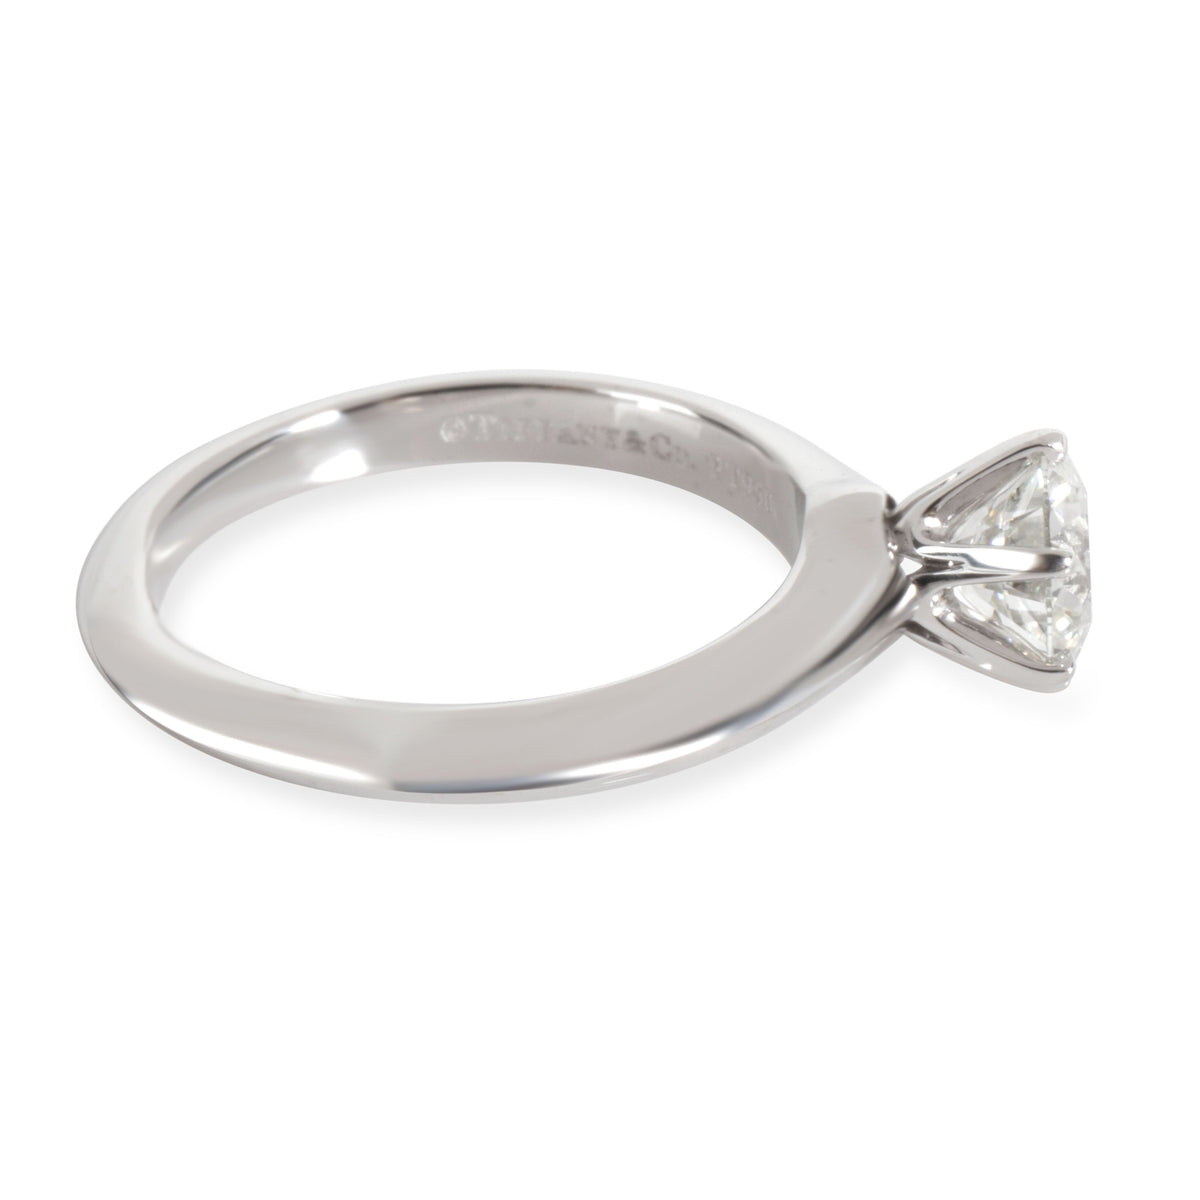 Tiffany & Co. Solitaire Diamond Engagement Ring in Platinum (0.97 ct G/VVS1)